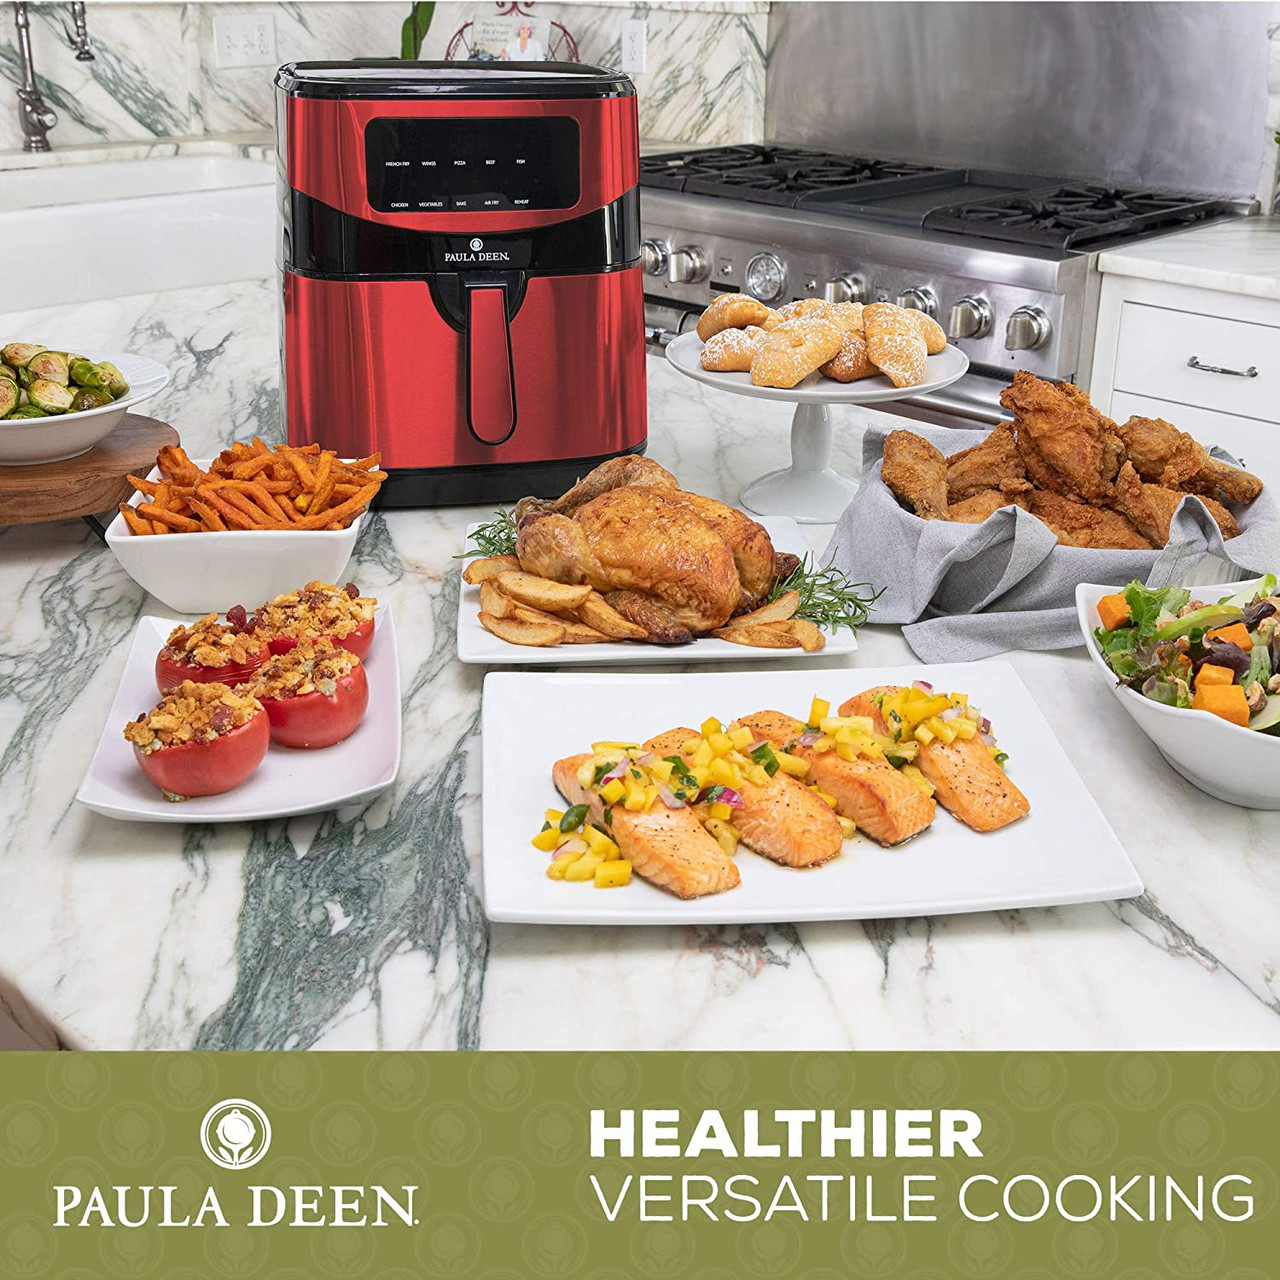 Rise by Dash Compact Air Fryer Oven with Temp Control Non-Stick Basket,  Recipes + Auto Shut off, 2 Quart - Red - New - 12 in. tall 